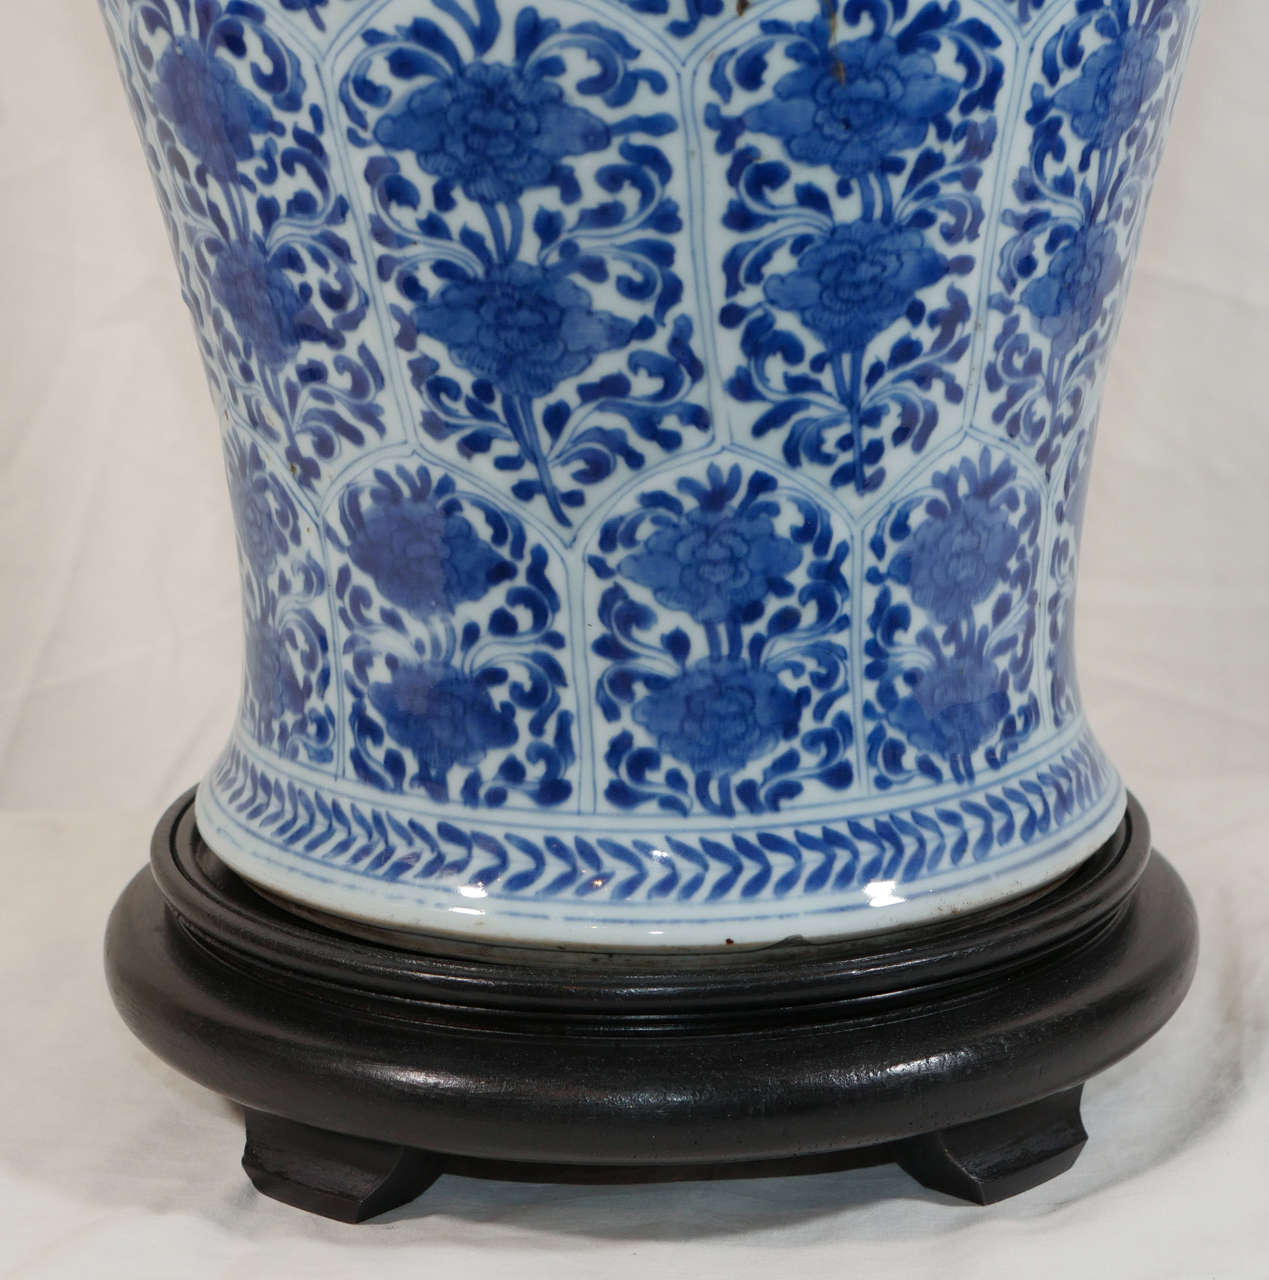 A pair Chinese Kangxi period blue and white covered vases of slender shape decorated with an all over pattern of elongated hexagonal panels with flowers painted in underglaze cobalt.